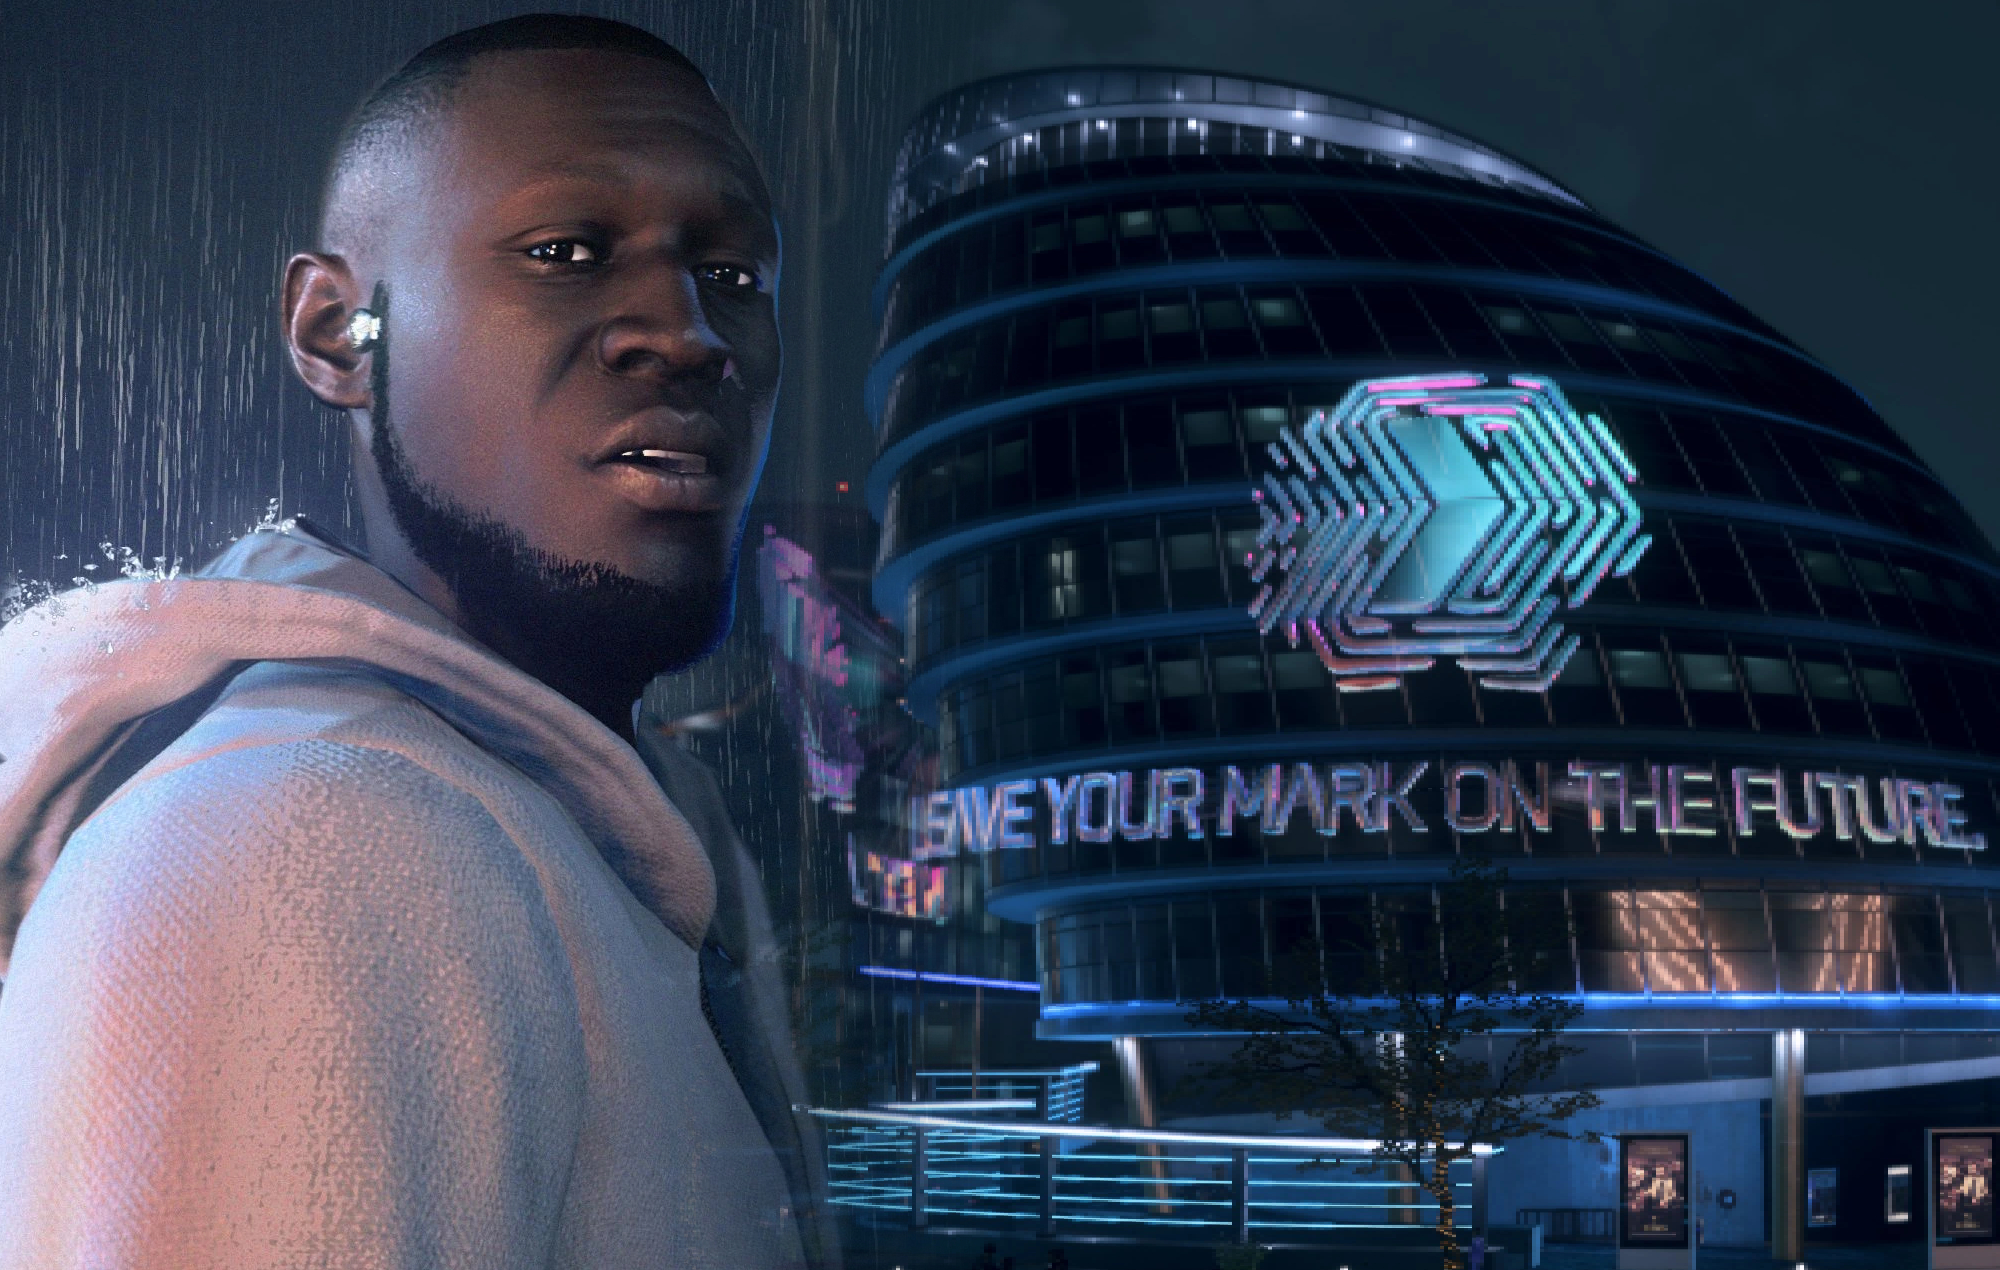 Stormzy Watch Dogs Legion Recruits Wallpapers